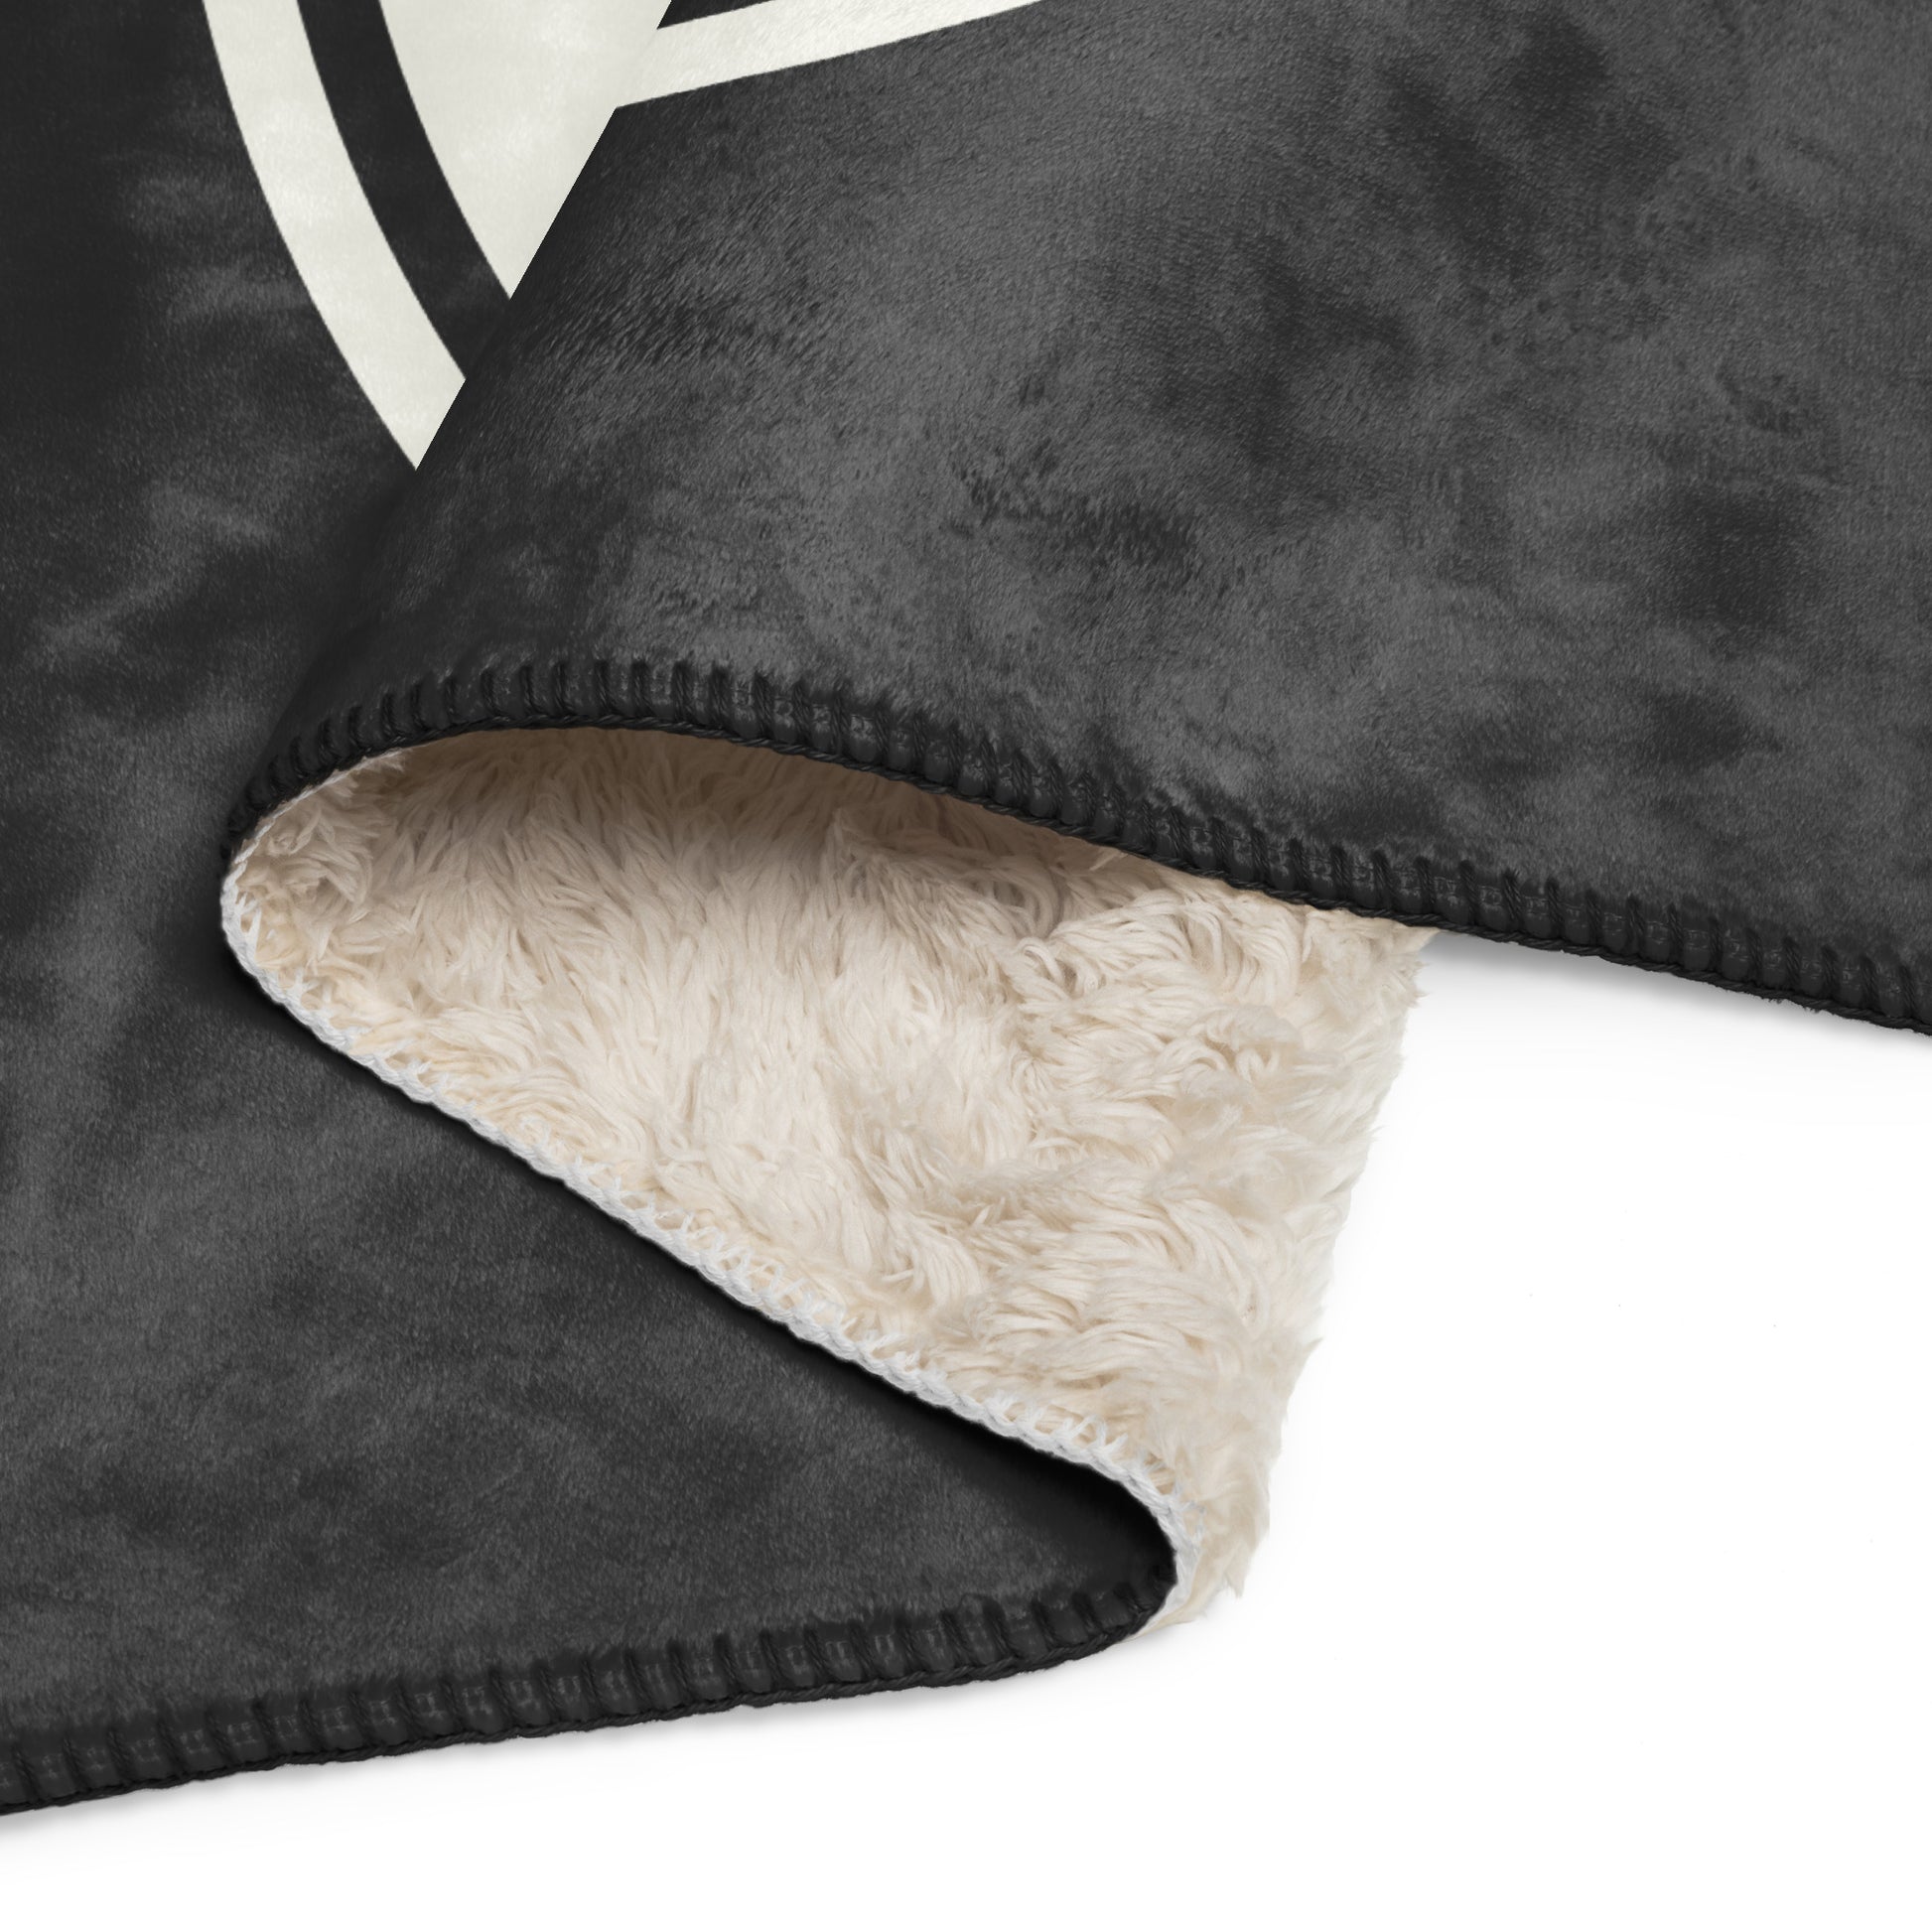 Unique Travel Gift Sherpa Blanket - White Oval • PIT Pittsburgh • YHM Designs - Image 08